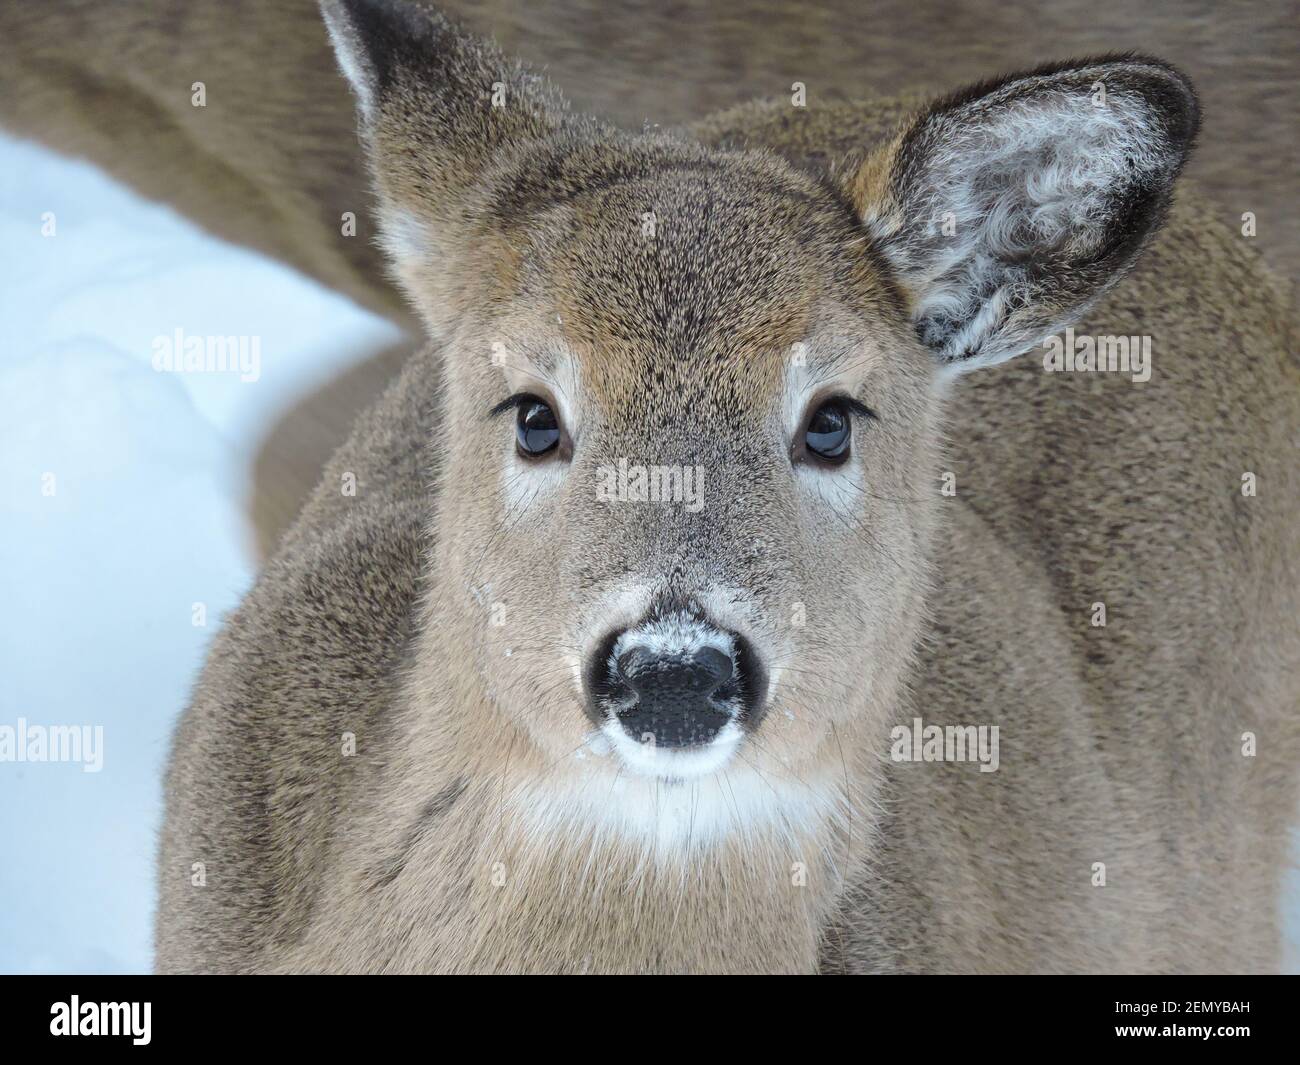 Young deer in the winter forest. Wild Canada. Animals of Nova Scotia. Stock Photo